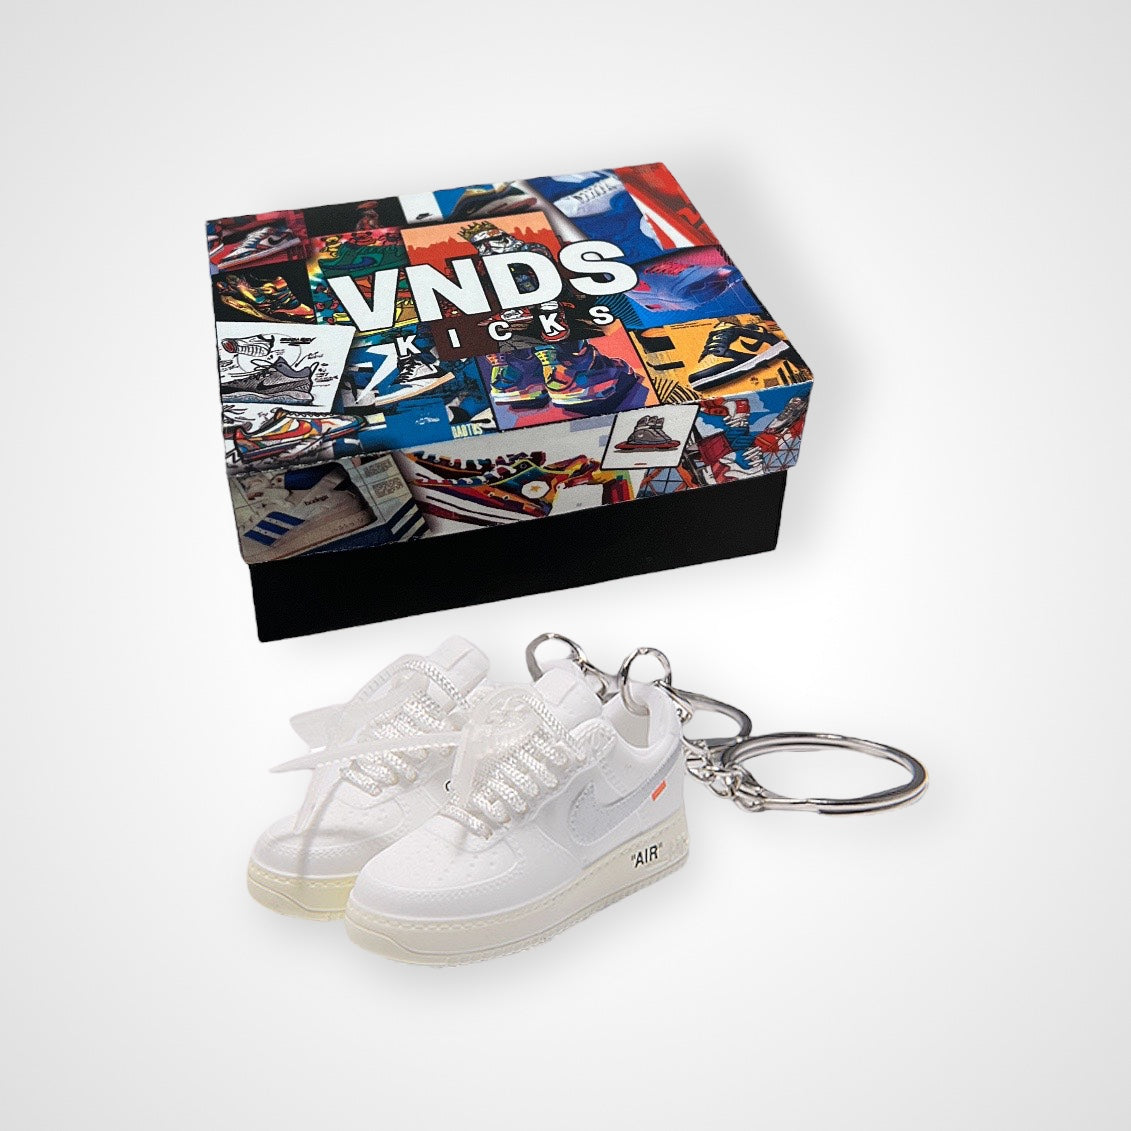 Air Force 1 x Off-White "ComplexCon" - Sneakers 3D Keychain